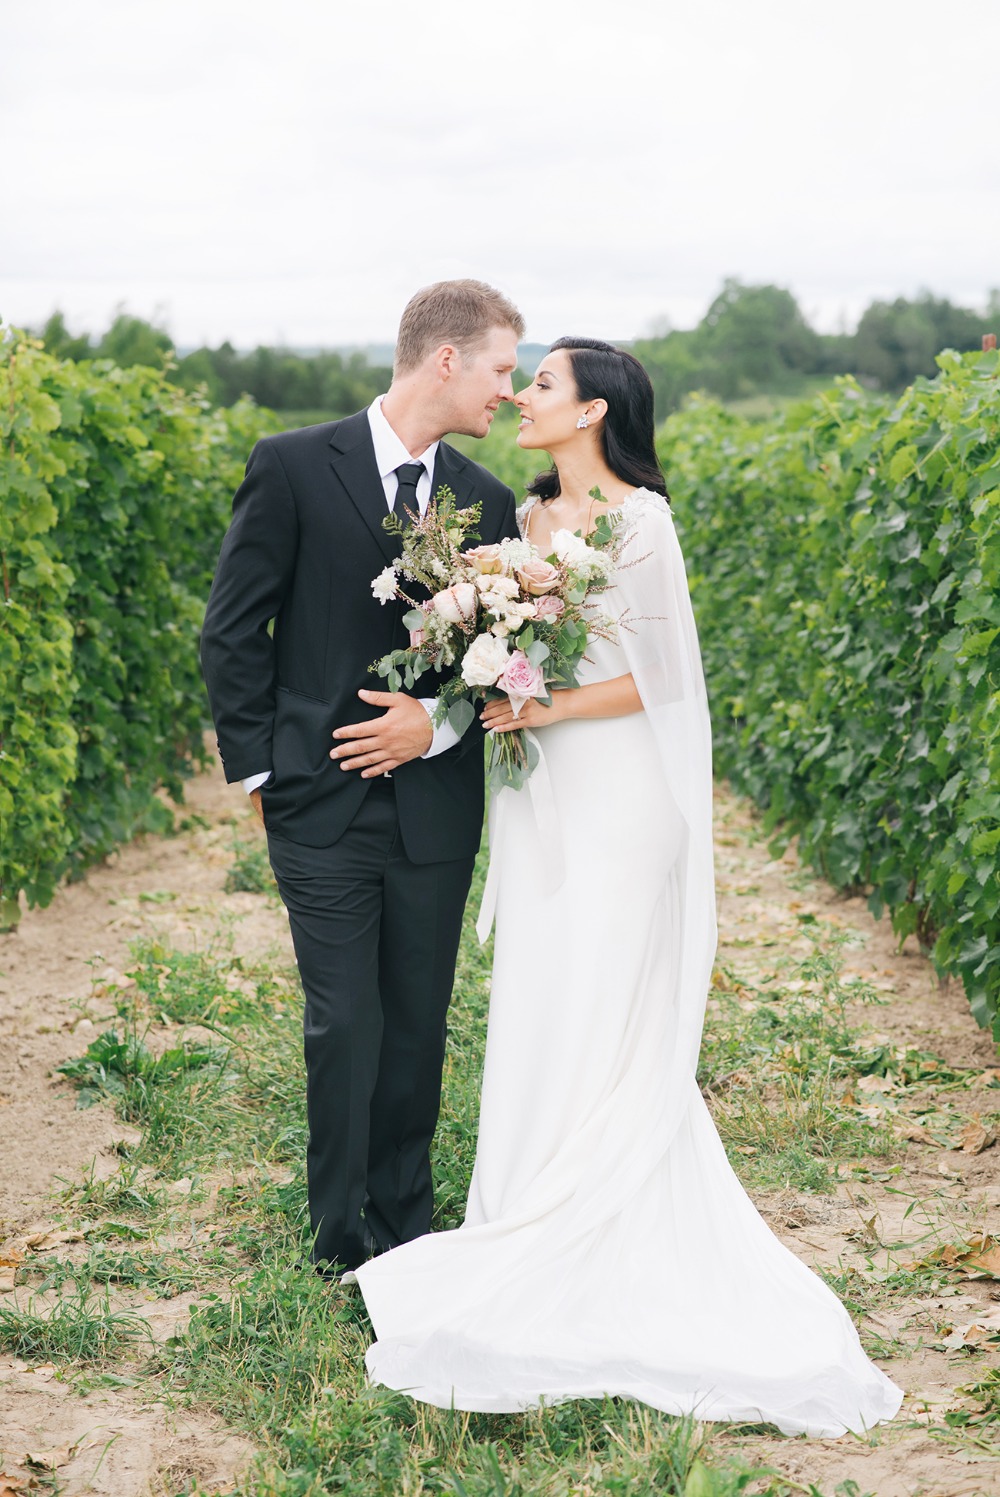 wedding couple at a winery